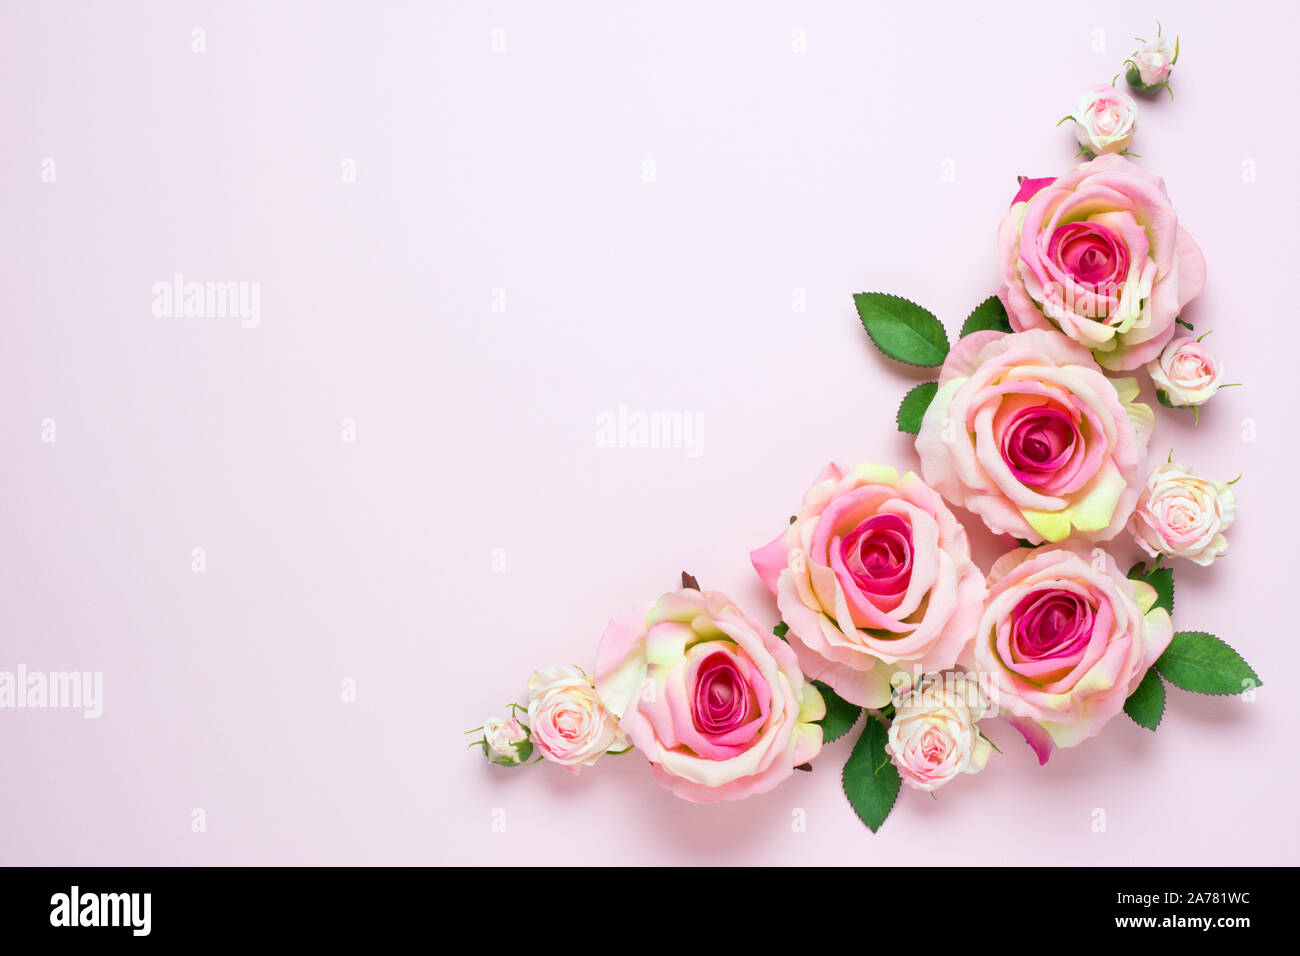 Beautiful Wedding Background With Pink Rose Flowers On Light Pink Background Stock Photo Alamy